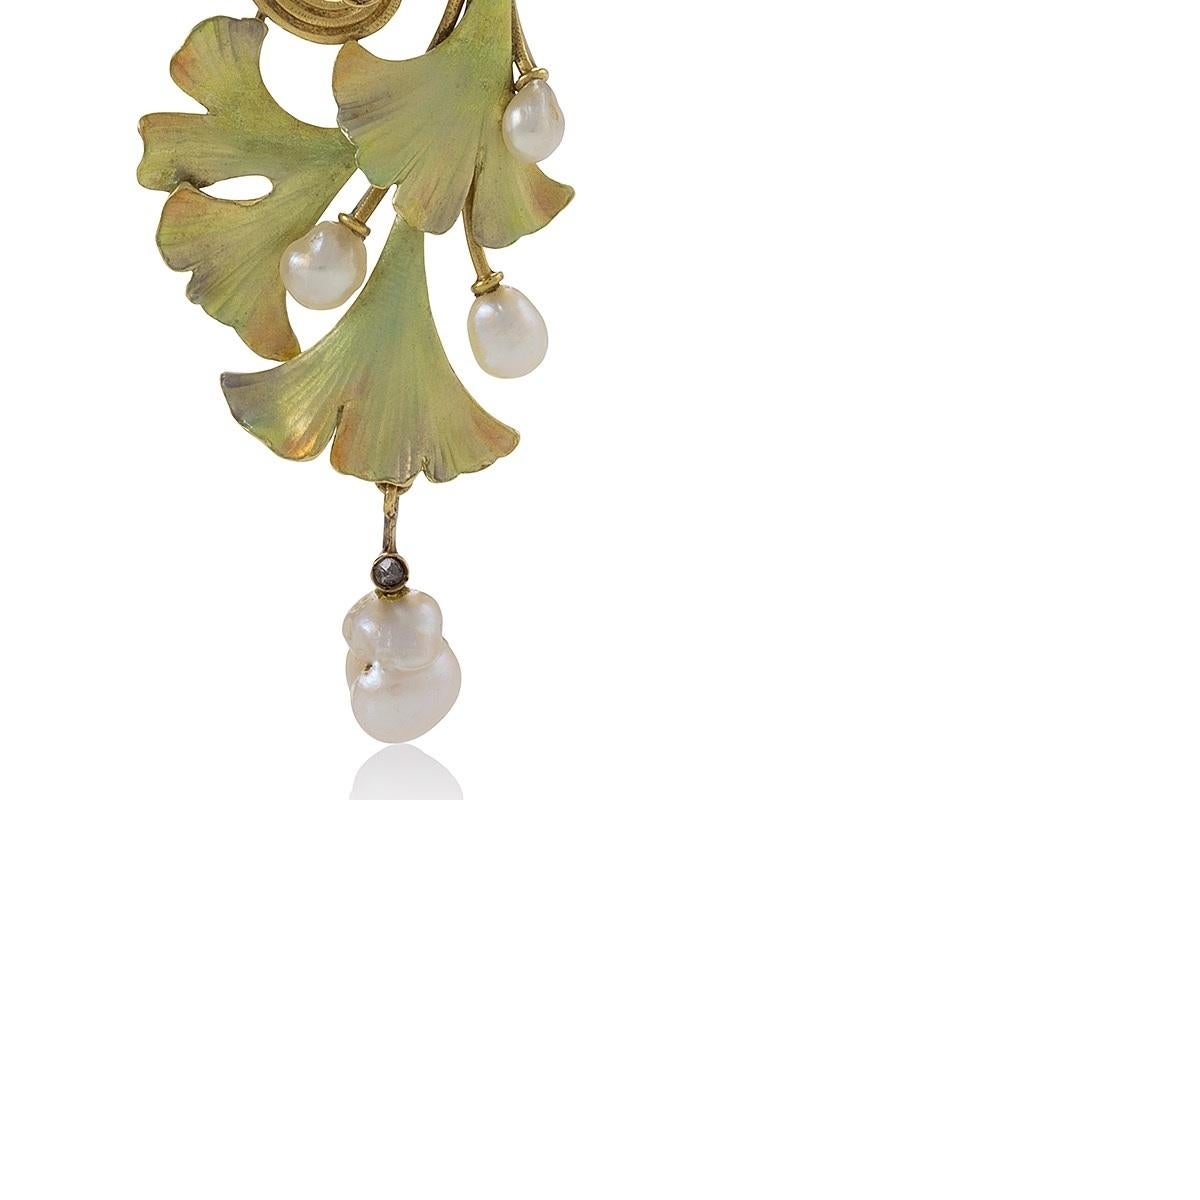 A French Art Nouveau 18 karat gold, enamel and diamond ginkgo leaf pendant, centering an oval pearl within a surround of ridged swirling vines, suspending a cascade of leaves and buds in iridescent green enamel with orange tones, accented by an old